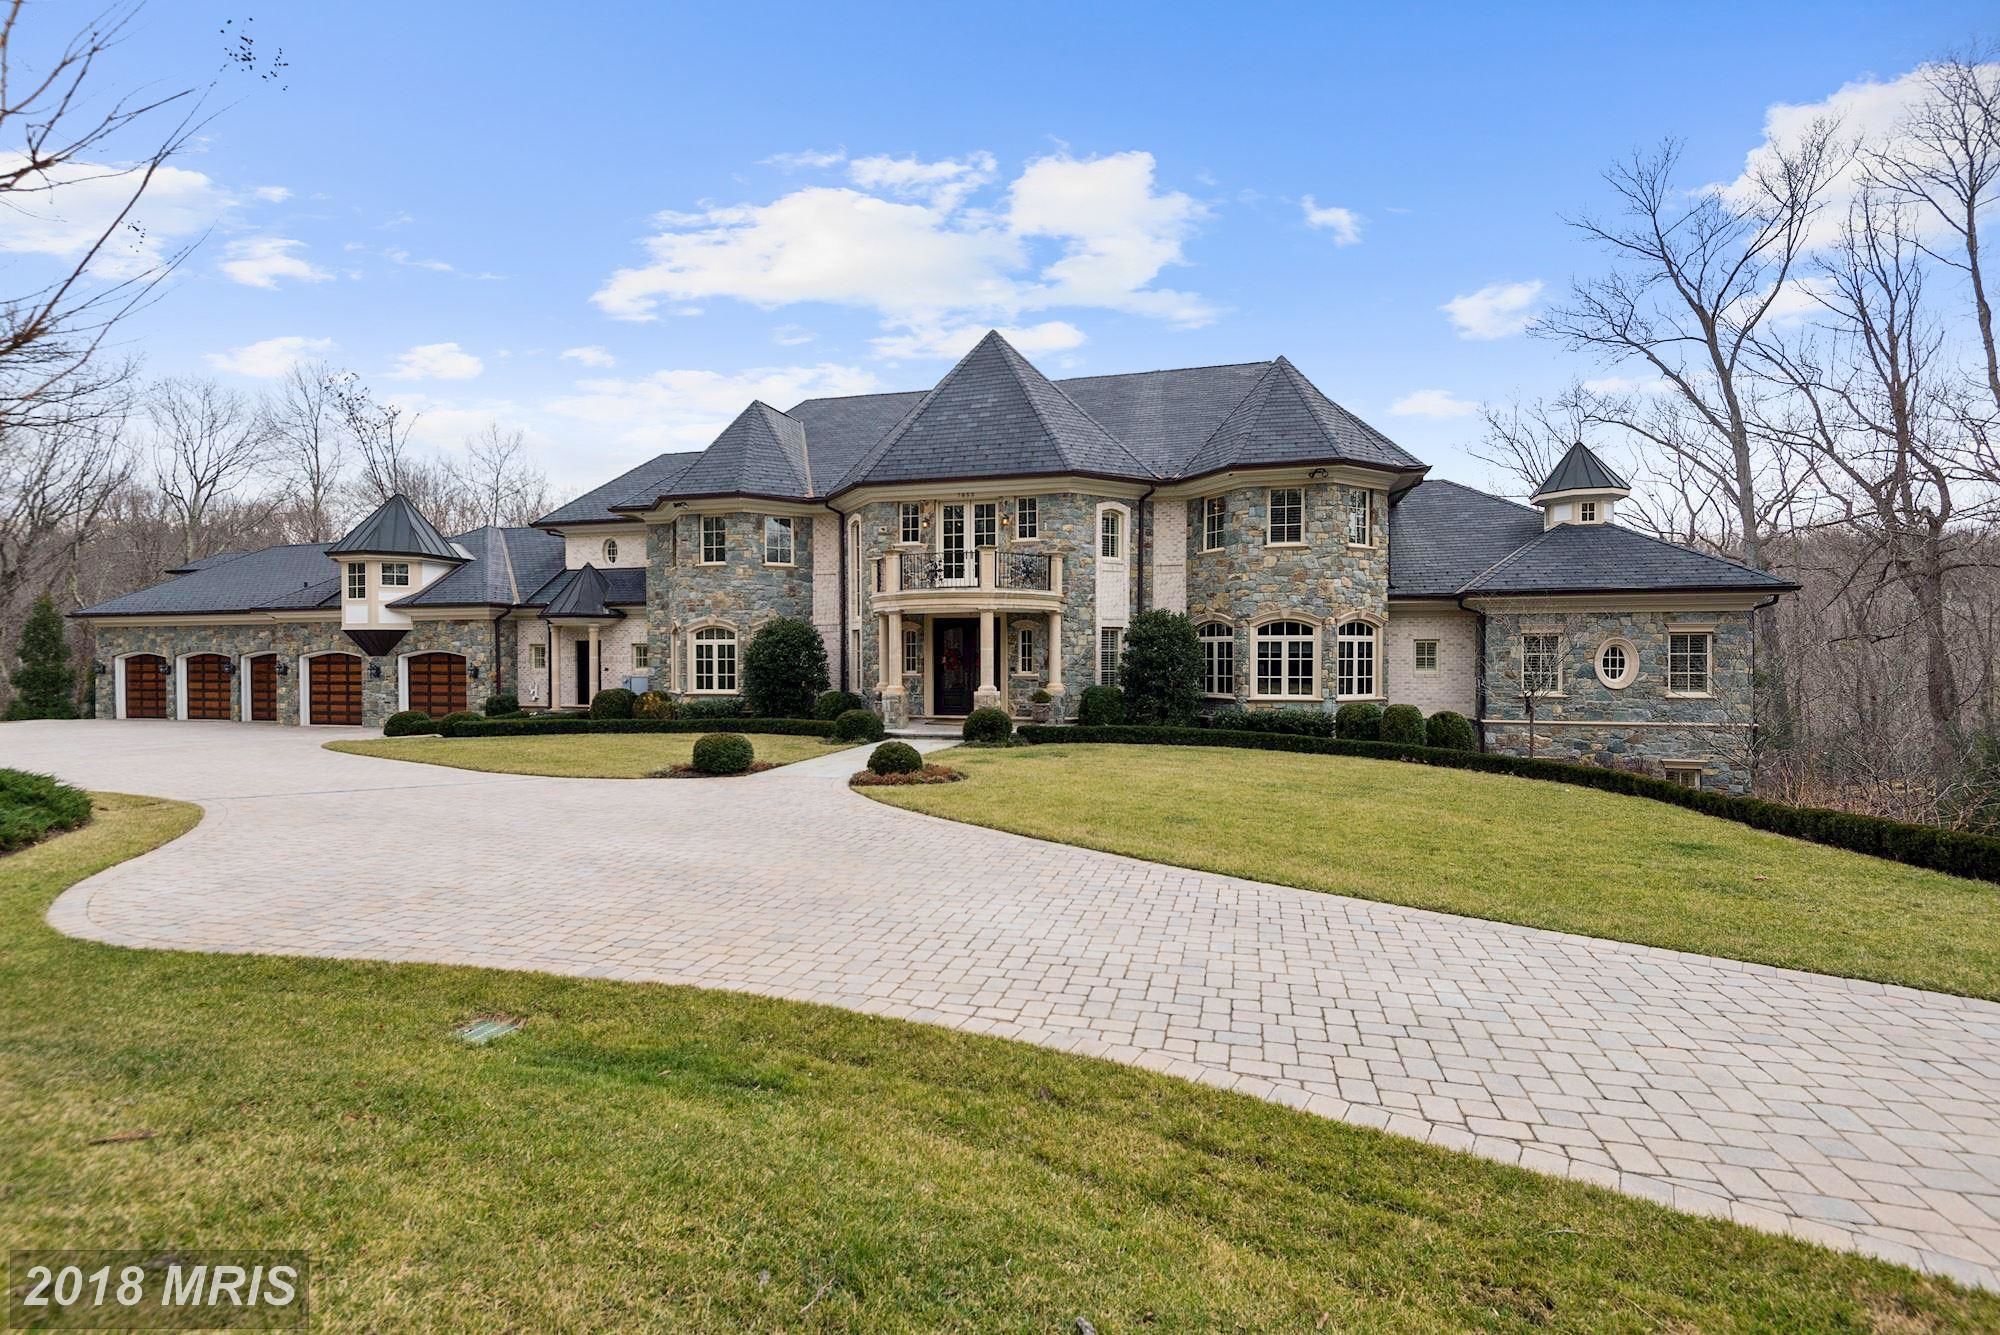 $55 million is the lowest price among these 7 homes for sale in